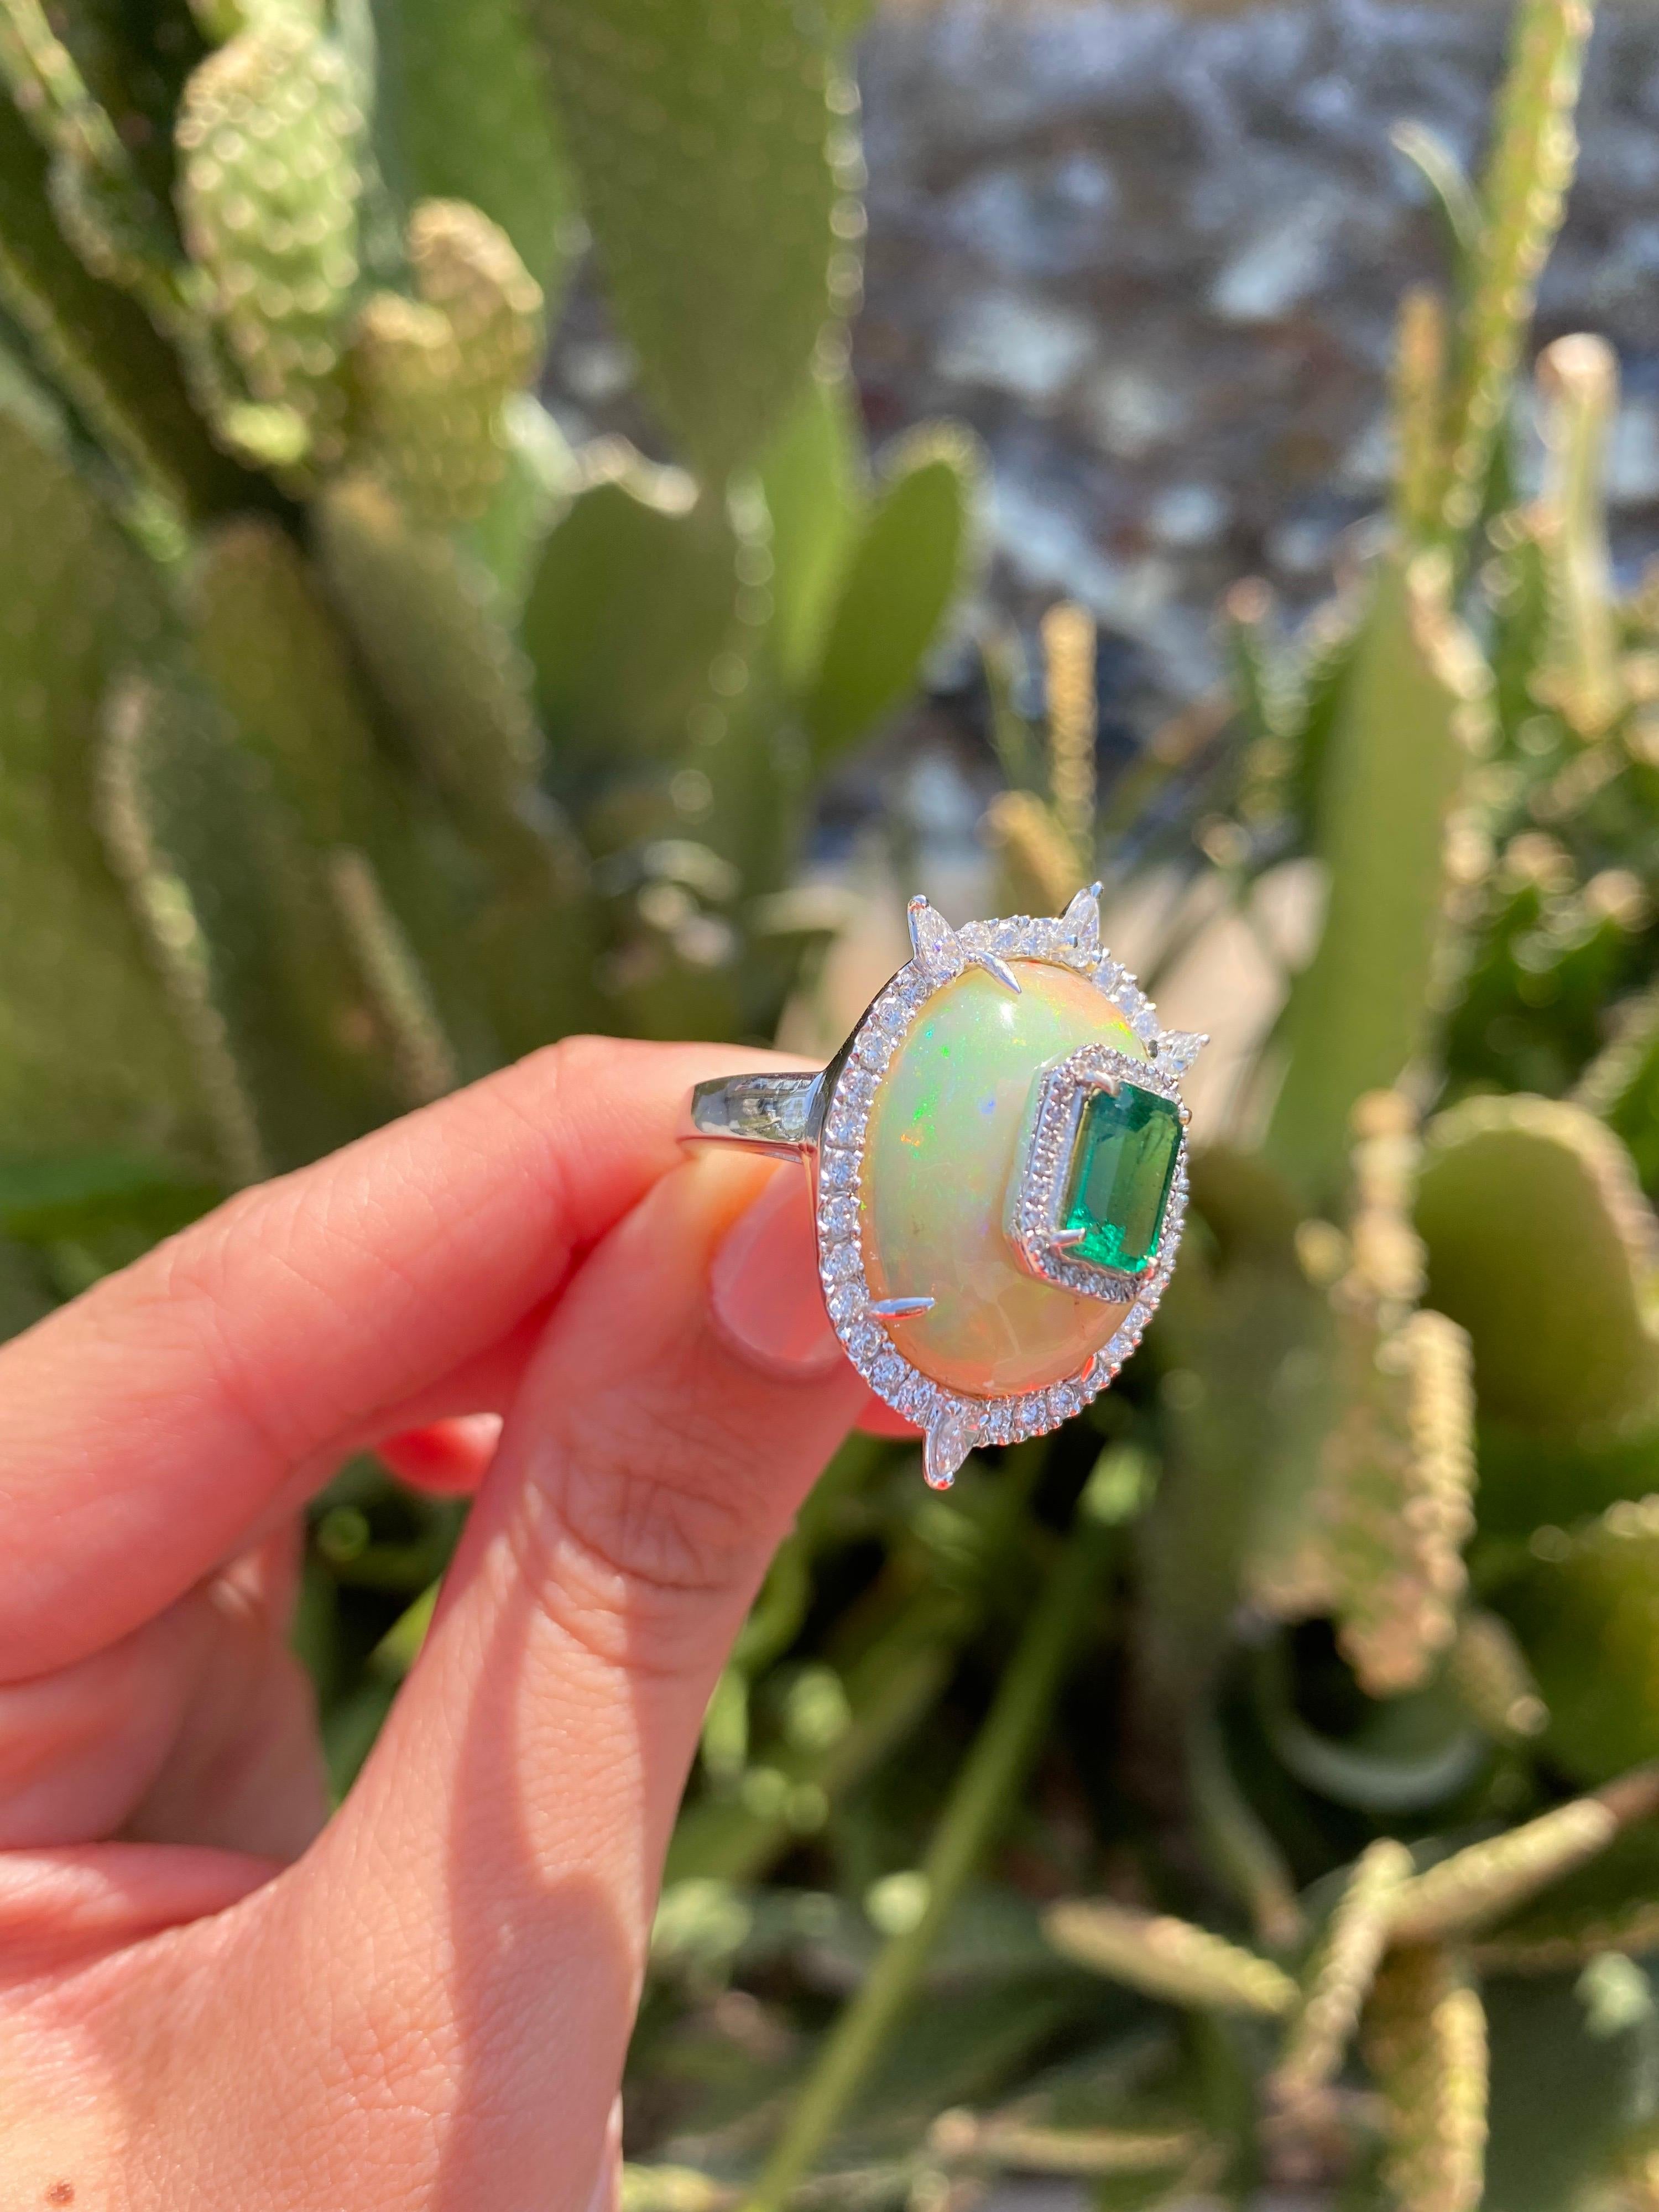 A very unique 9.2 carat Ethiopian Opal with an absolutely stunning (no inclusion, great colour and luster) 1.87 carat Zambian Emerald, and White Diamonds. The stones are completely natural, and are set using solid 18K White Gold. 
Currently sized at